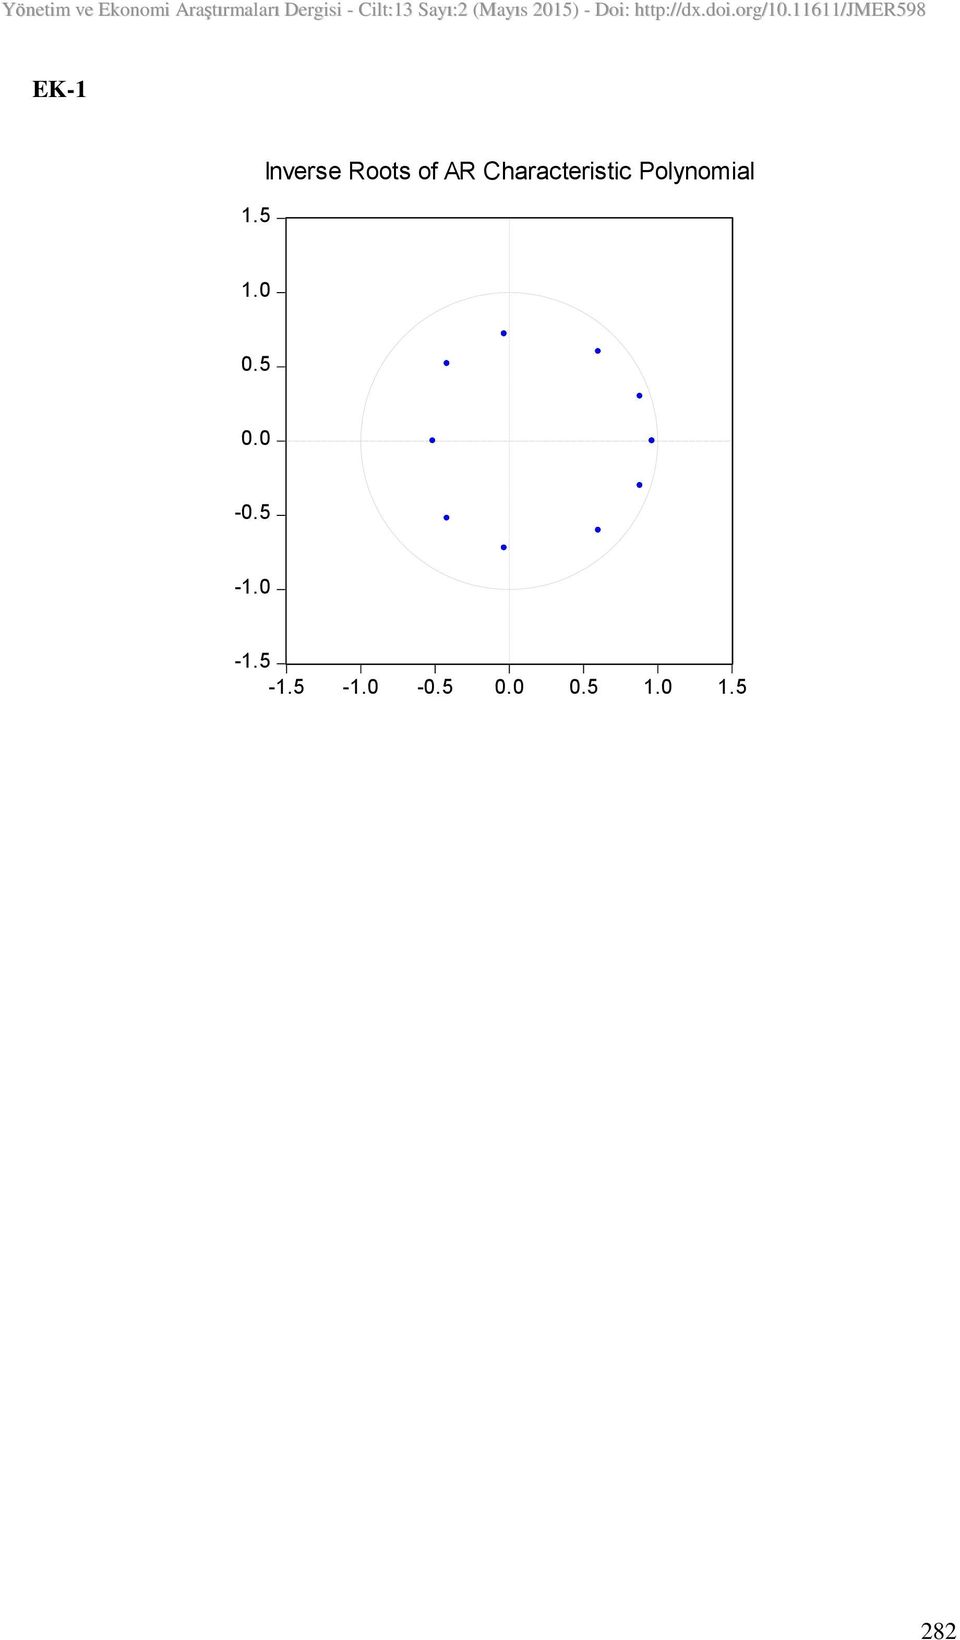 Characteristic Polynomial 1.